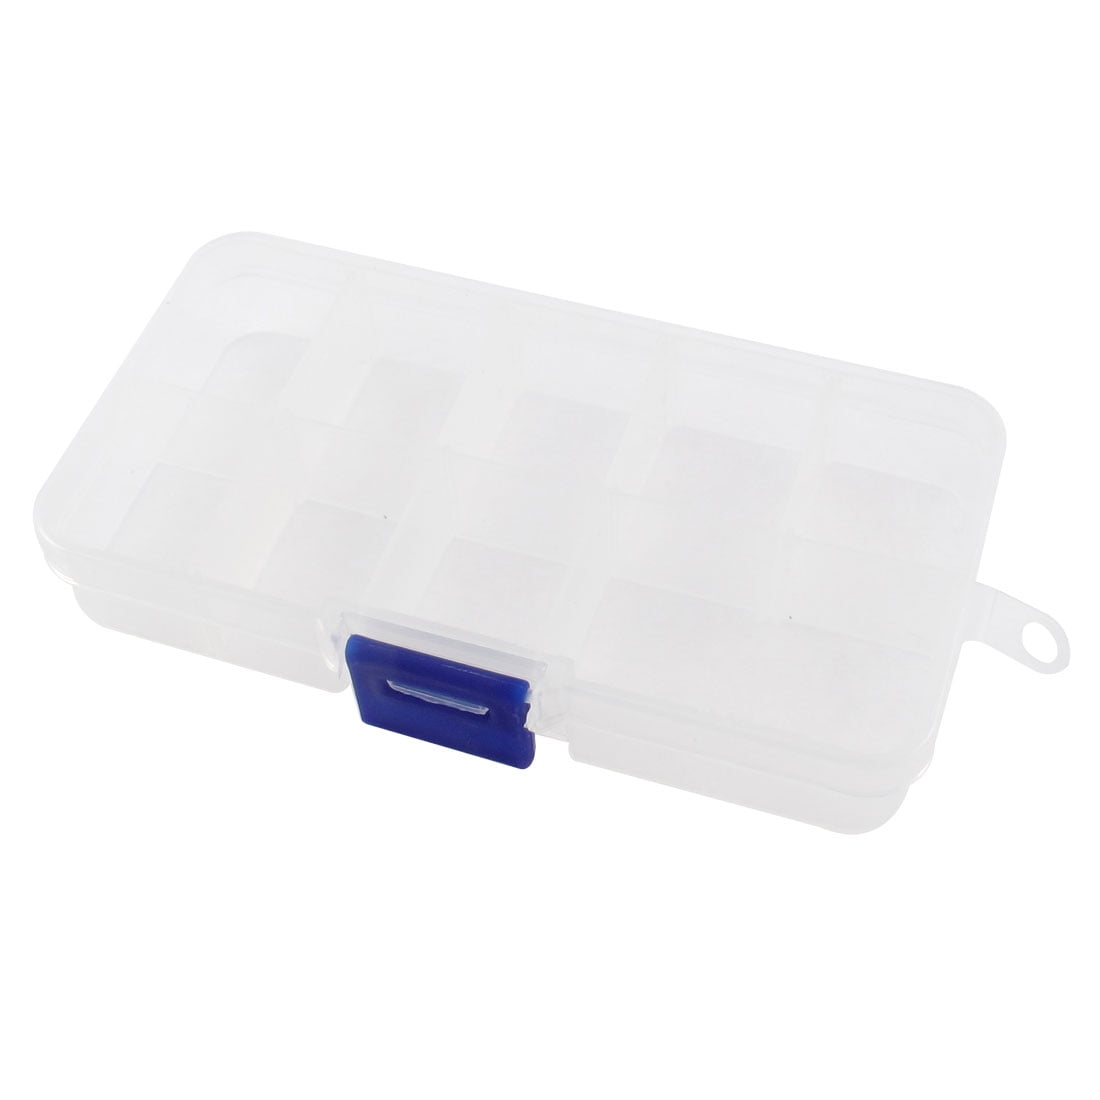 Details about   Jot SMALL CLEAR PLASTIC LOCK-TOP ORGANIZER CASE 9 Section Sz-7.5"x6.5"x2.25” 